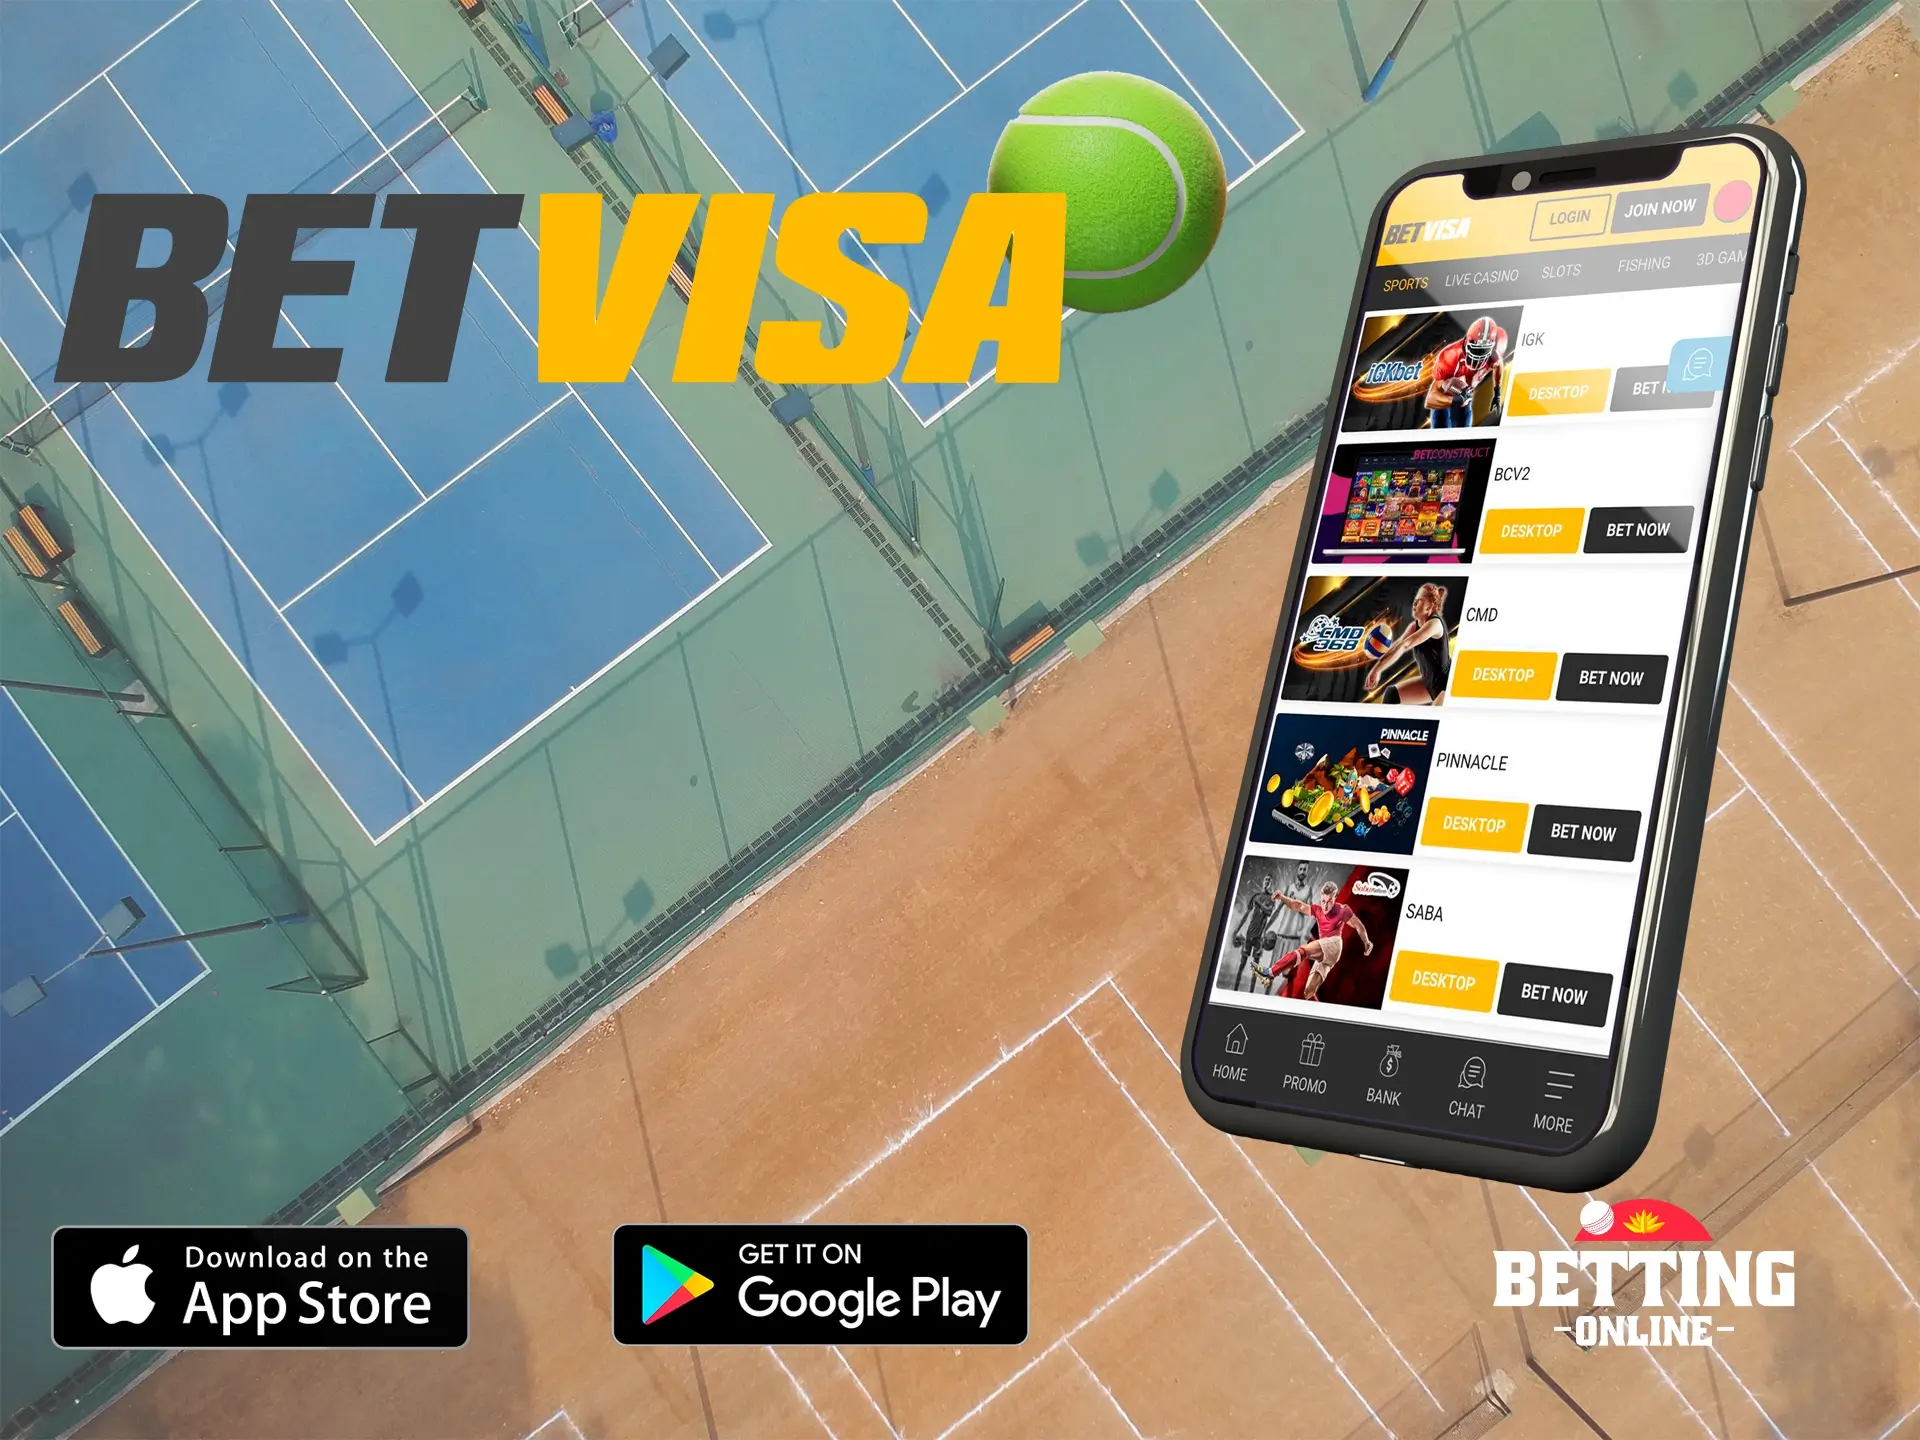 Betvisa always listens to its users and tries to improve its app as quickly as possible.